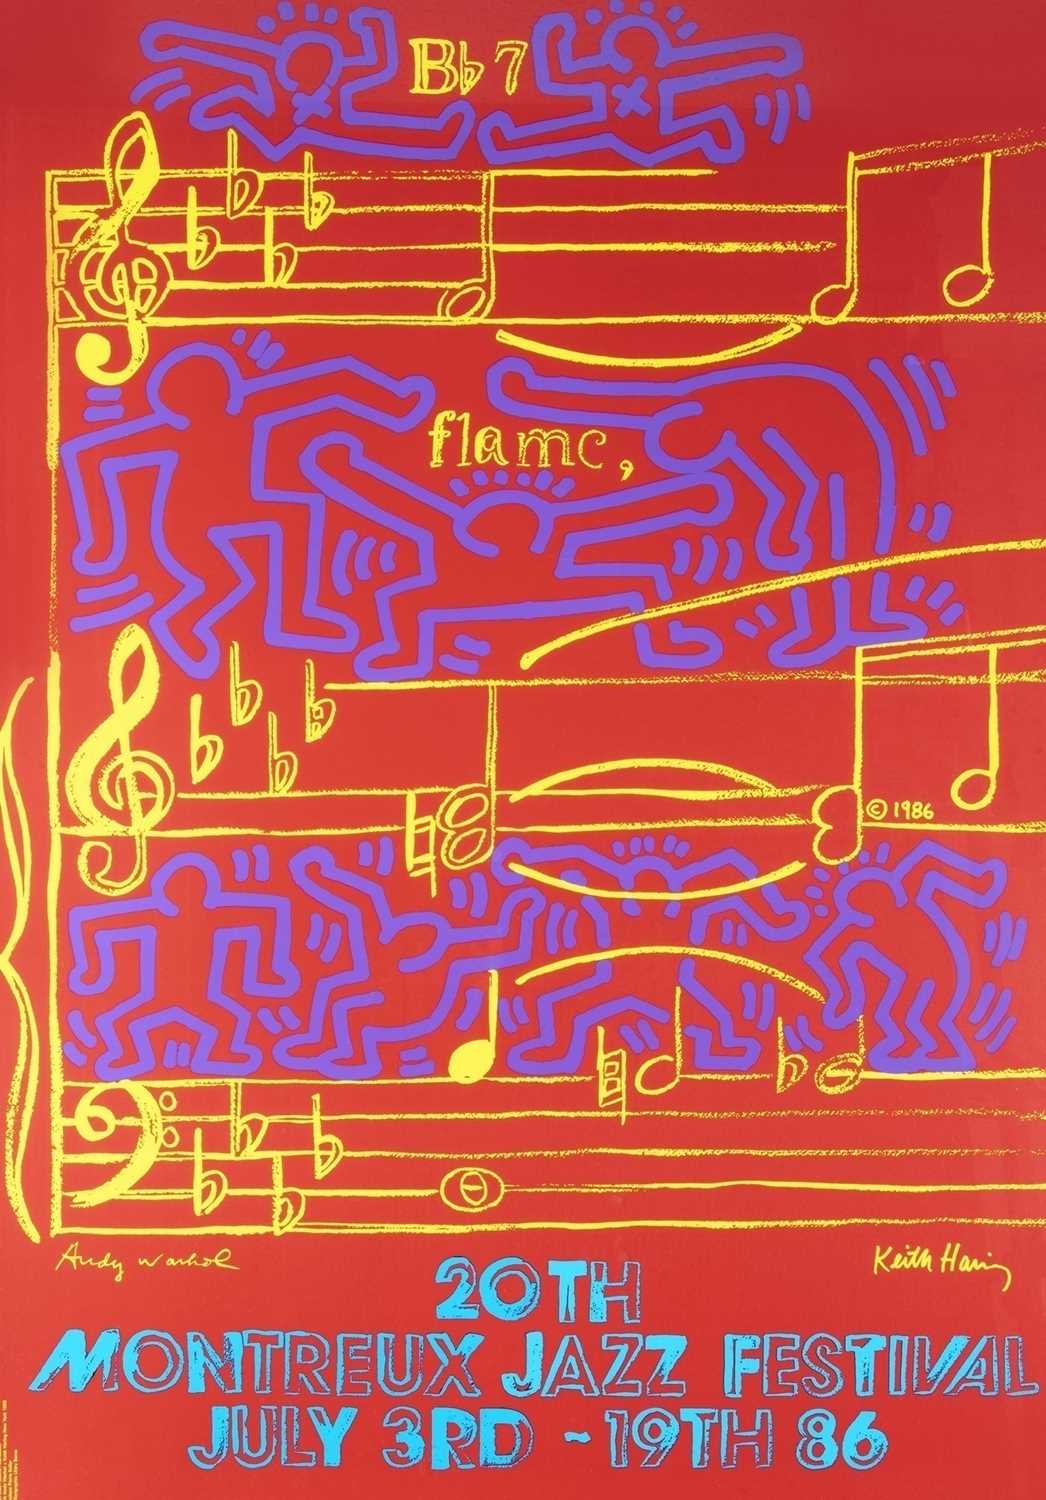 Lot 263 - Andy Warhol & Keith Haring (Collaboration), 'Montreux Jazz Festival', 1986